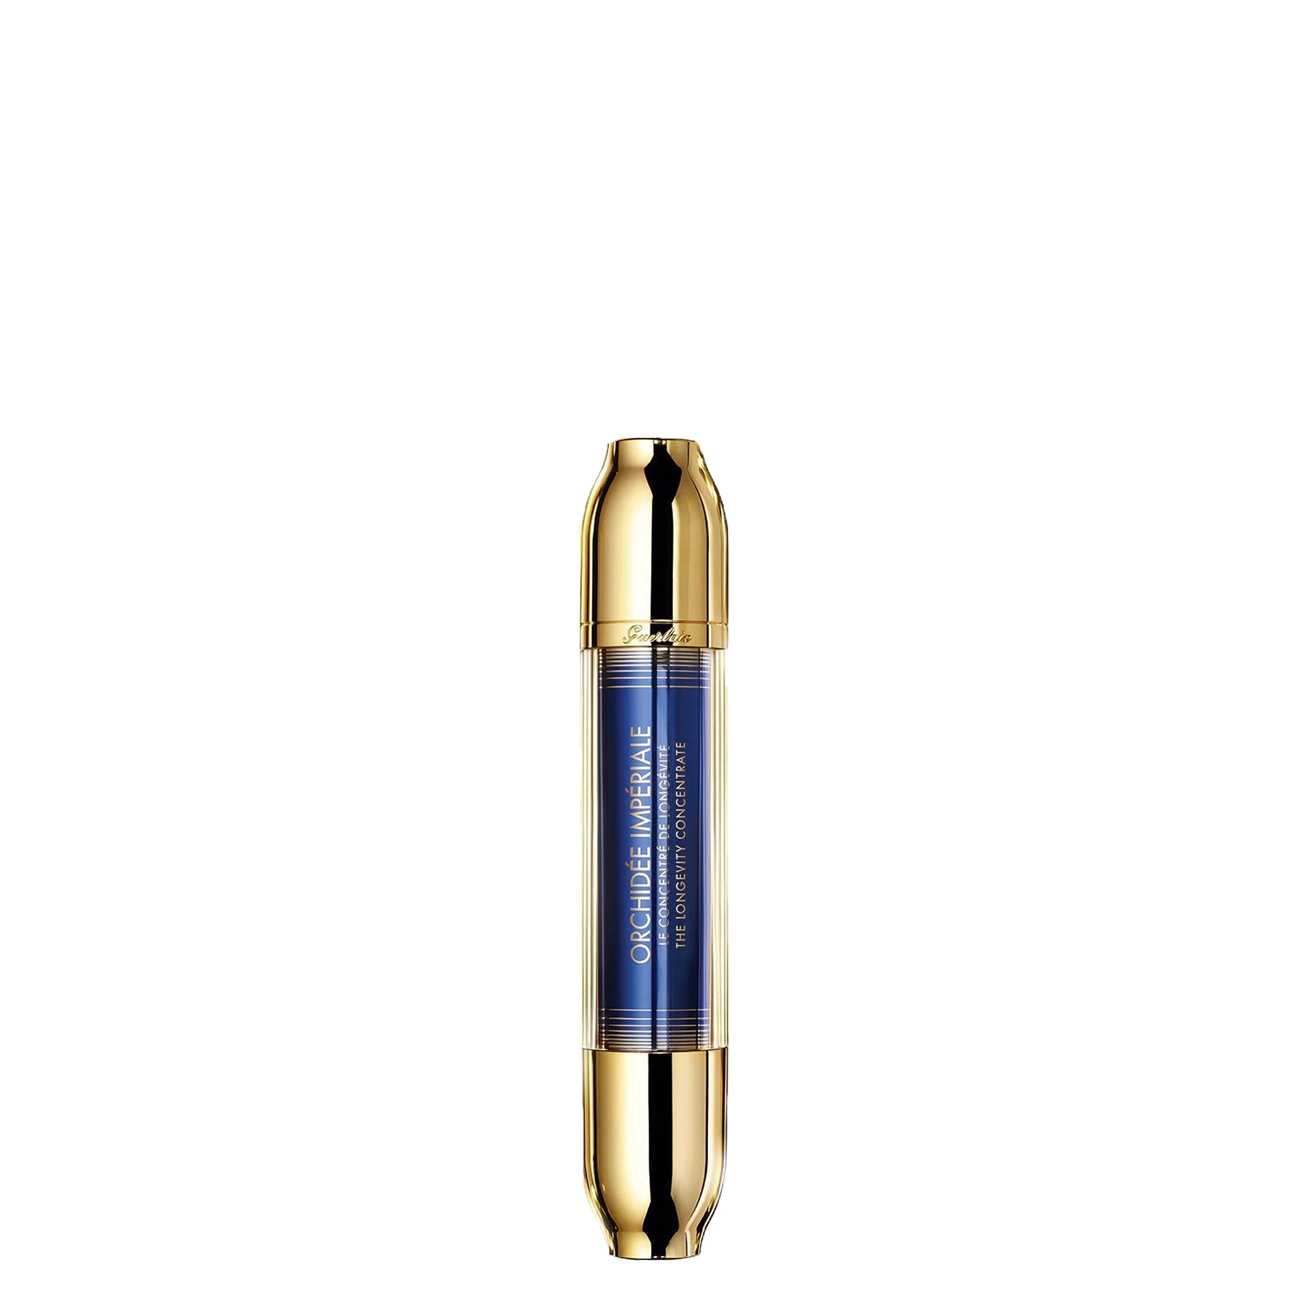 ORCHIDEE IMPERIALE LONGEVITY CONCENTRATE SERUM 30 ML